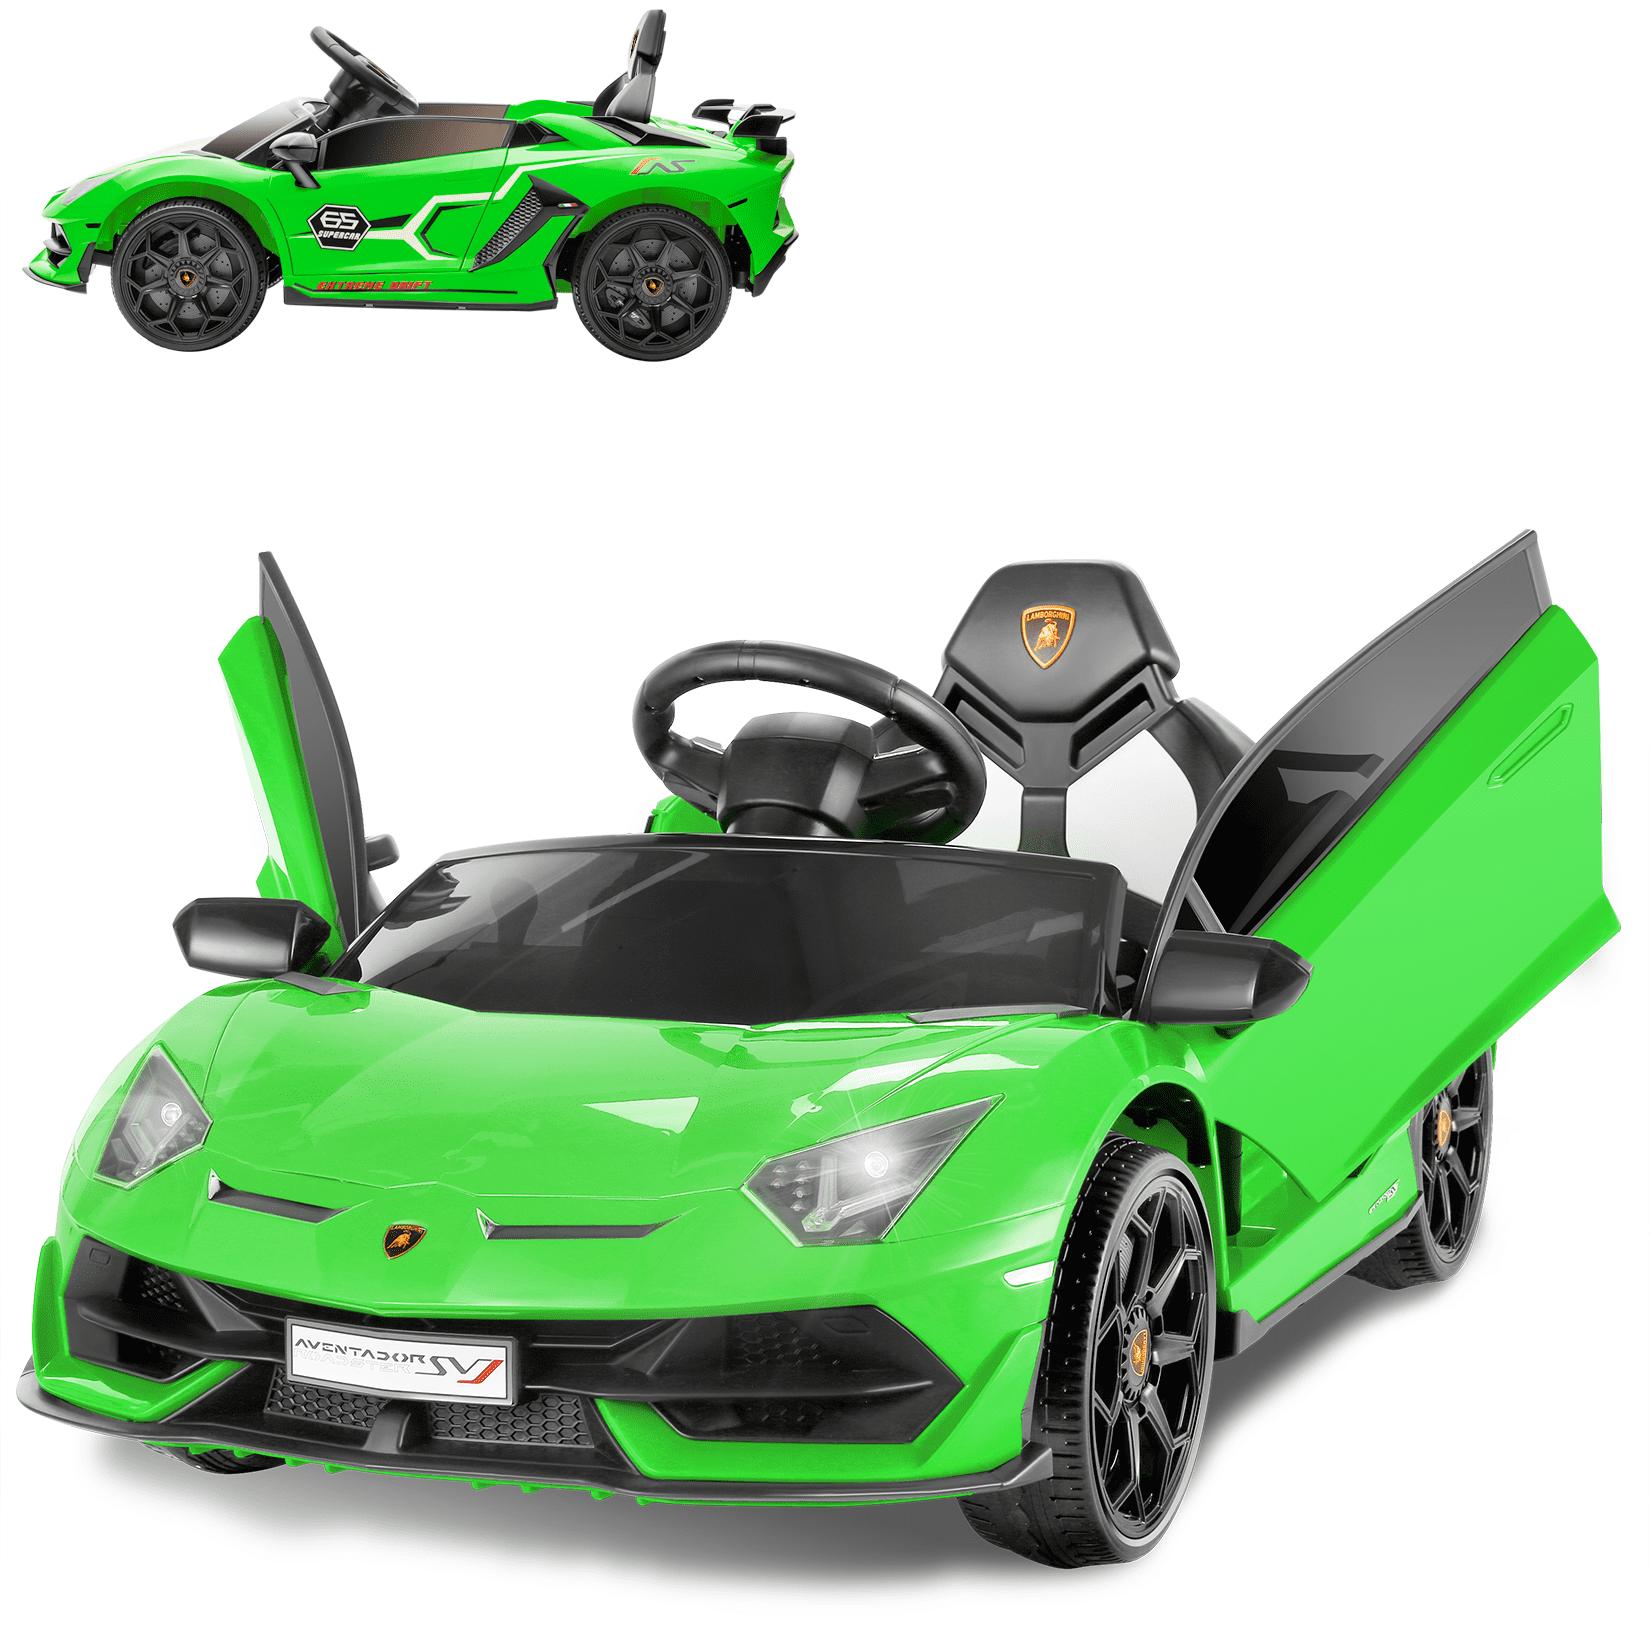 Lamborghini Car Toy Remote Control: Durability, safety, and battery life - the top priorities for a Lamborghini car toy remote control.